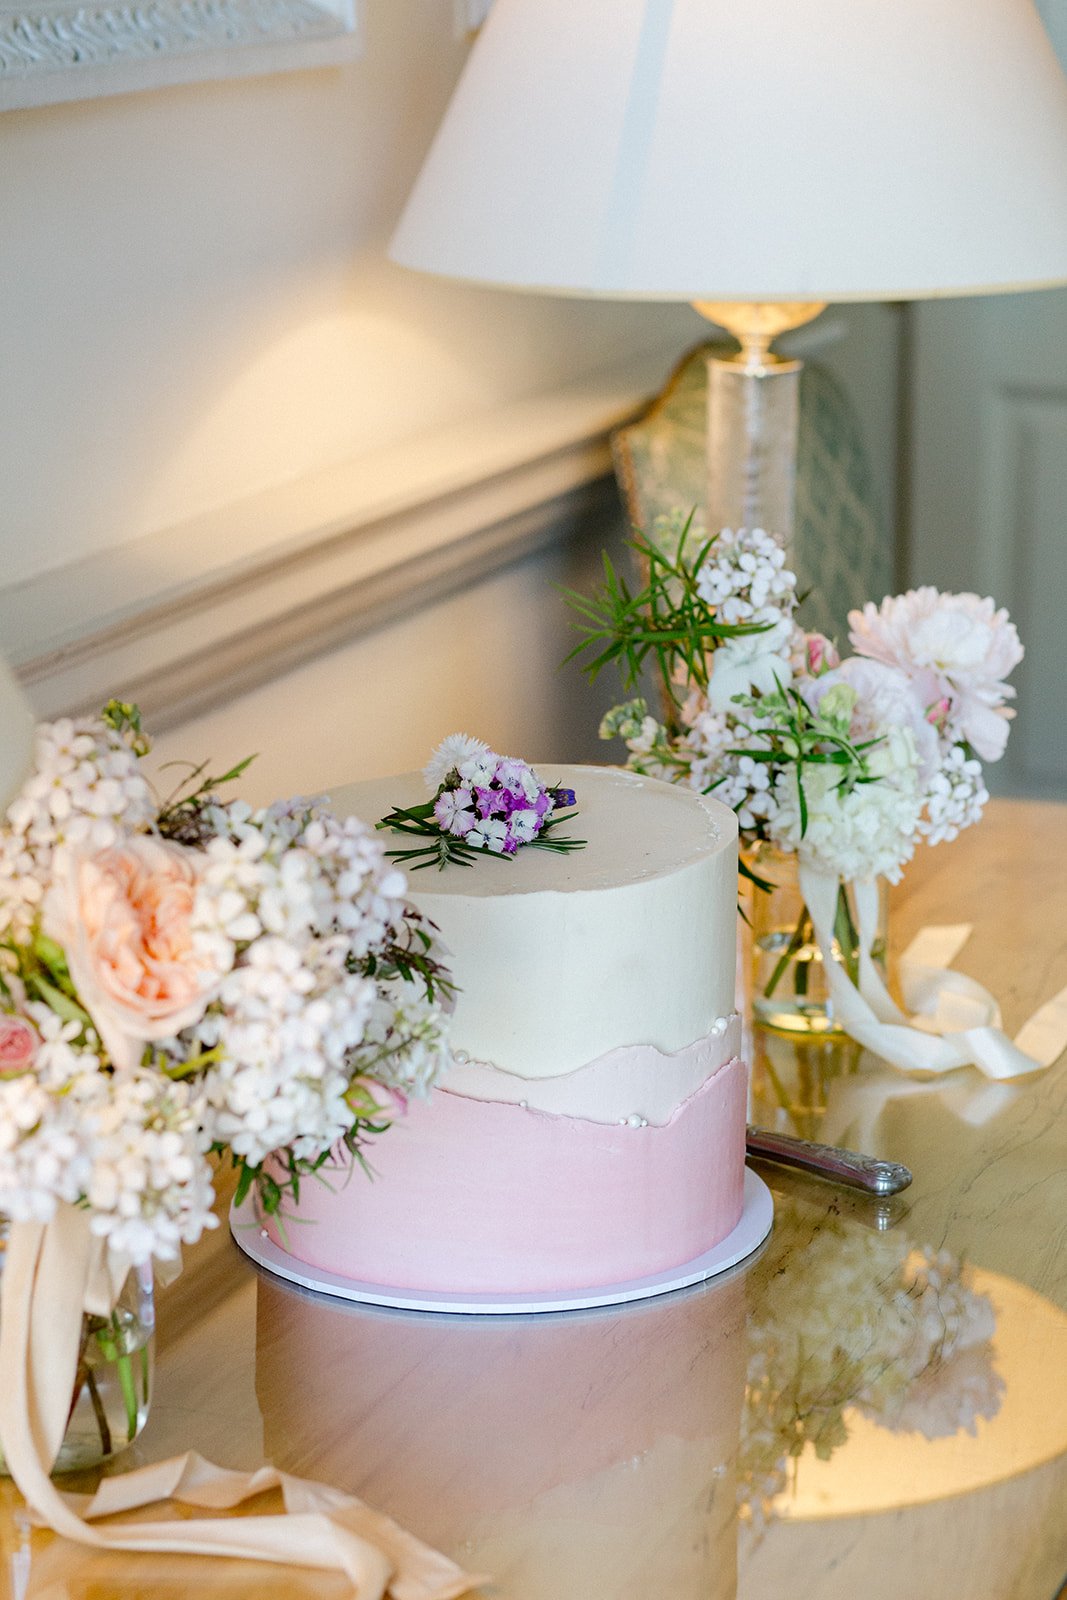 Dressing the cake table with repurposed flowers